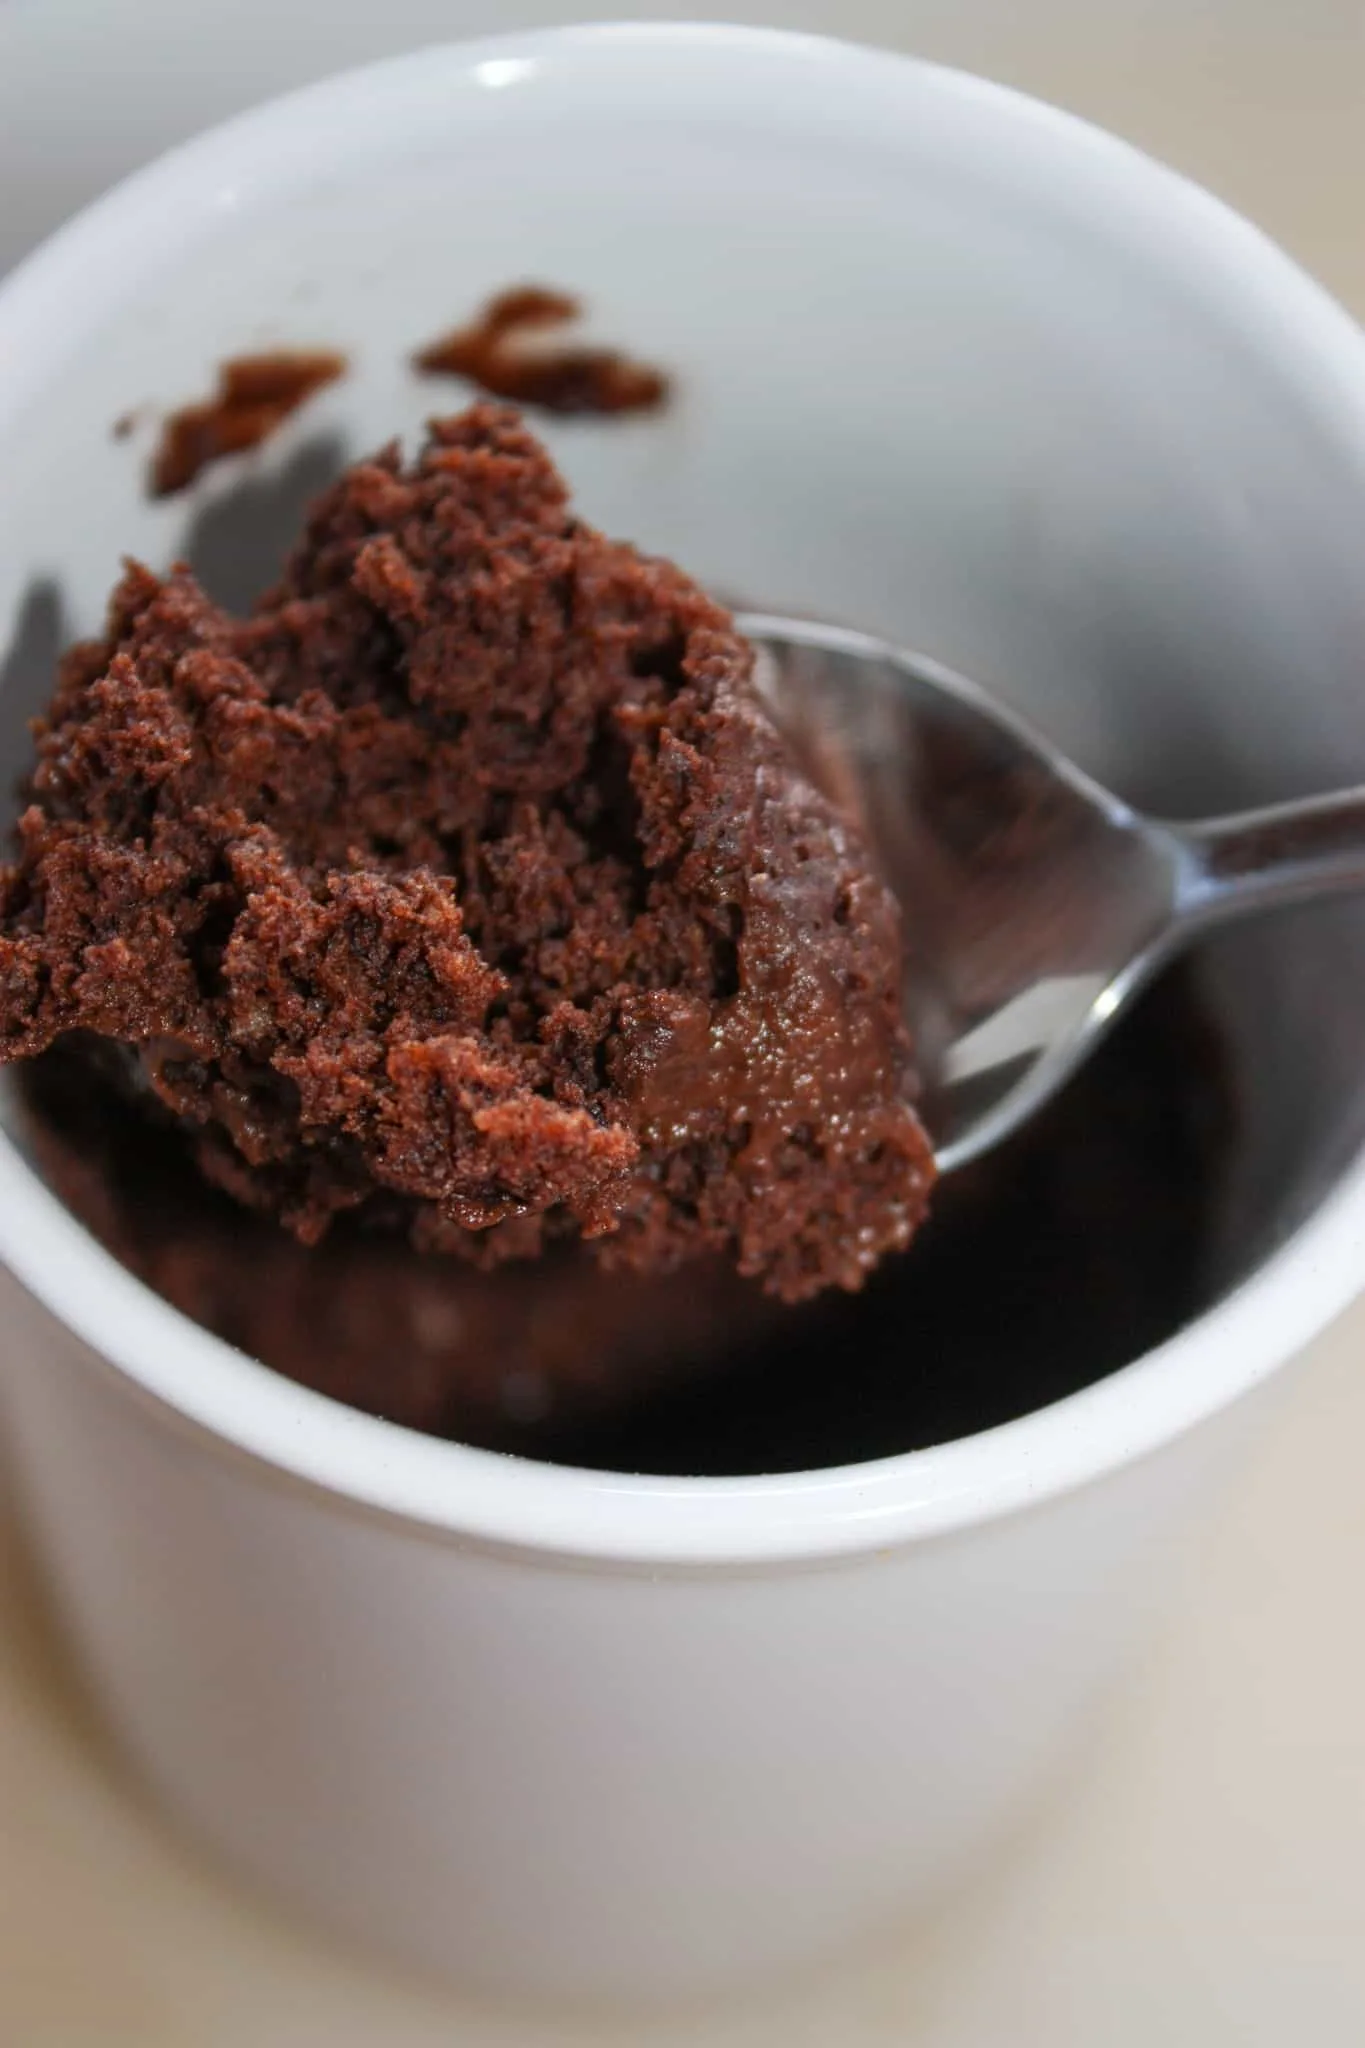 This fudgy chocolate Mug Brownie is a delicious and easy single serving dessert recipe.